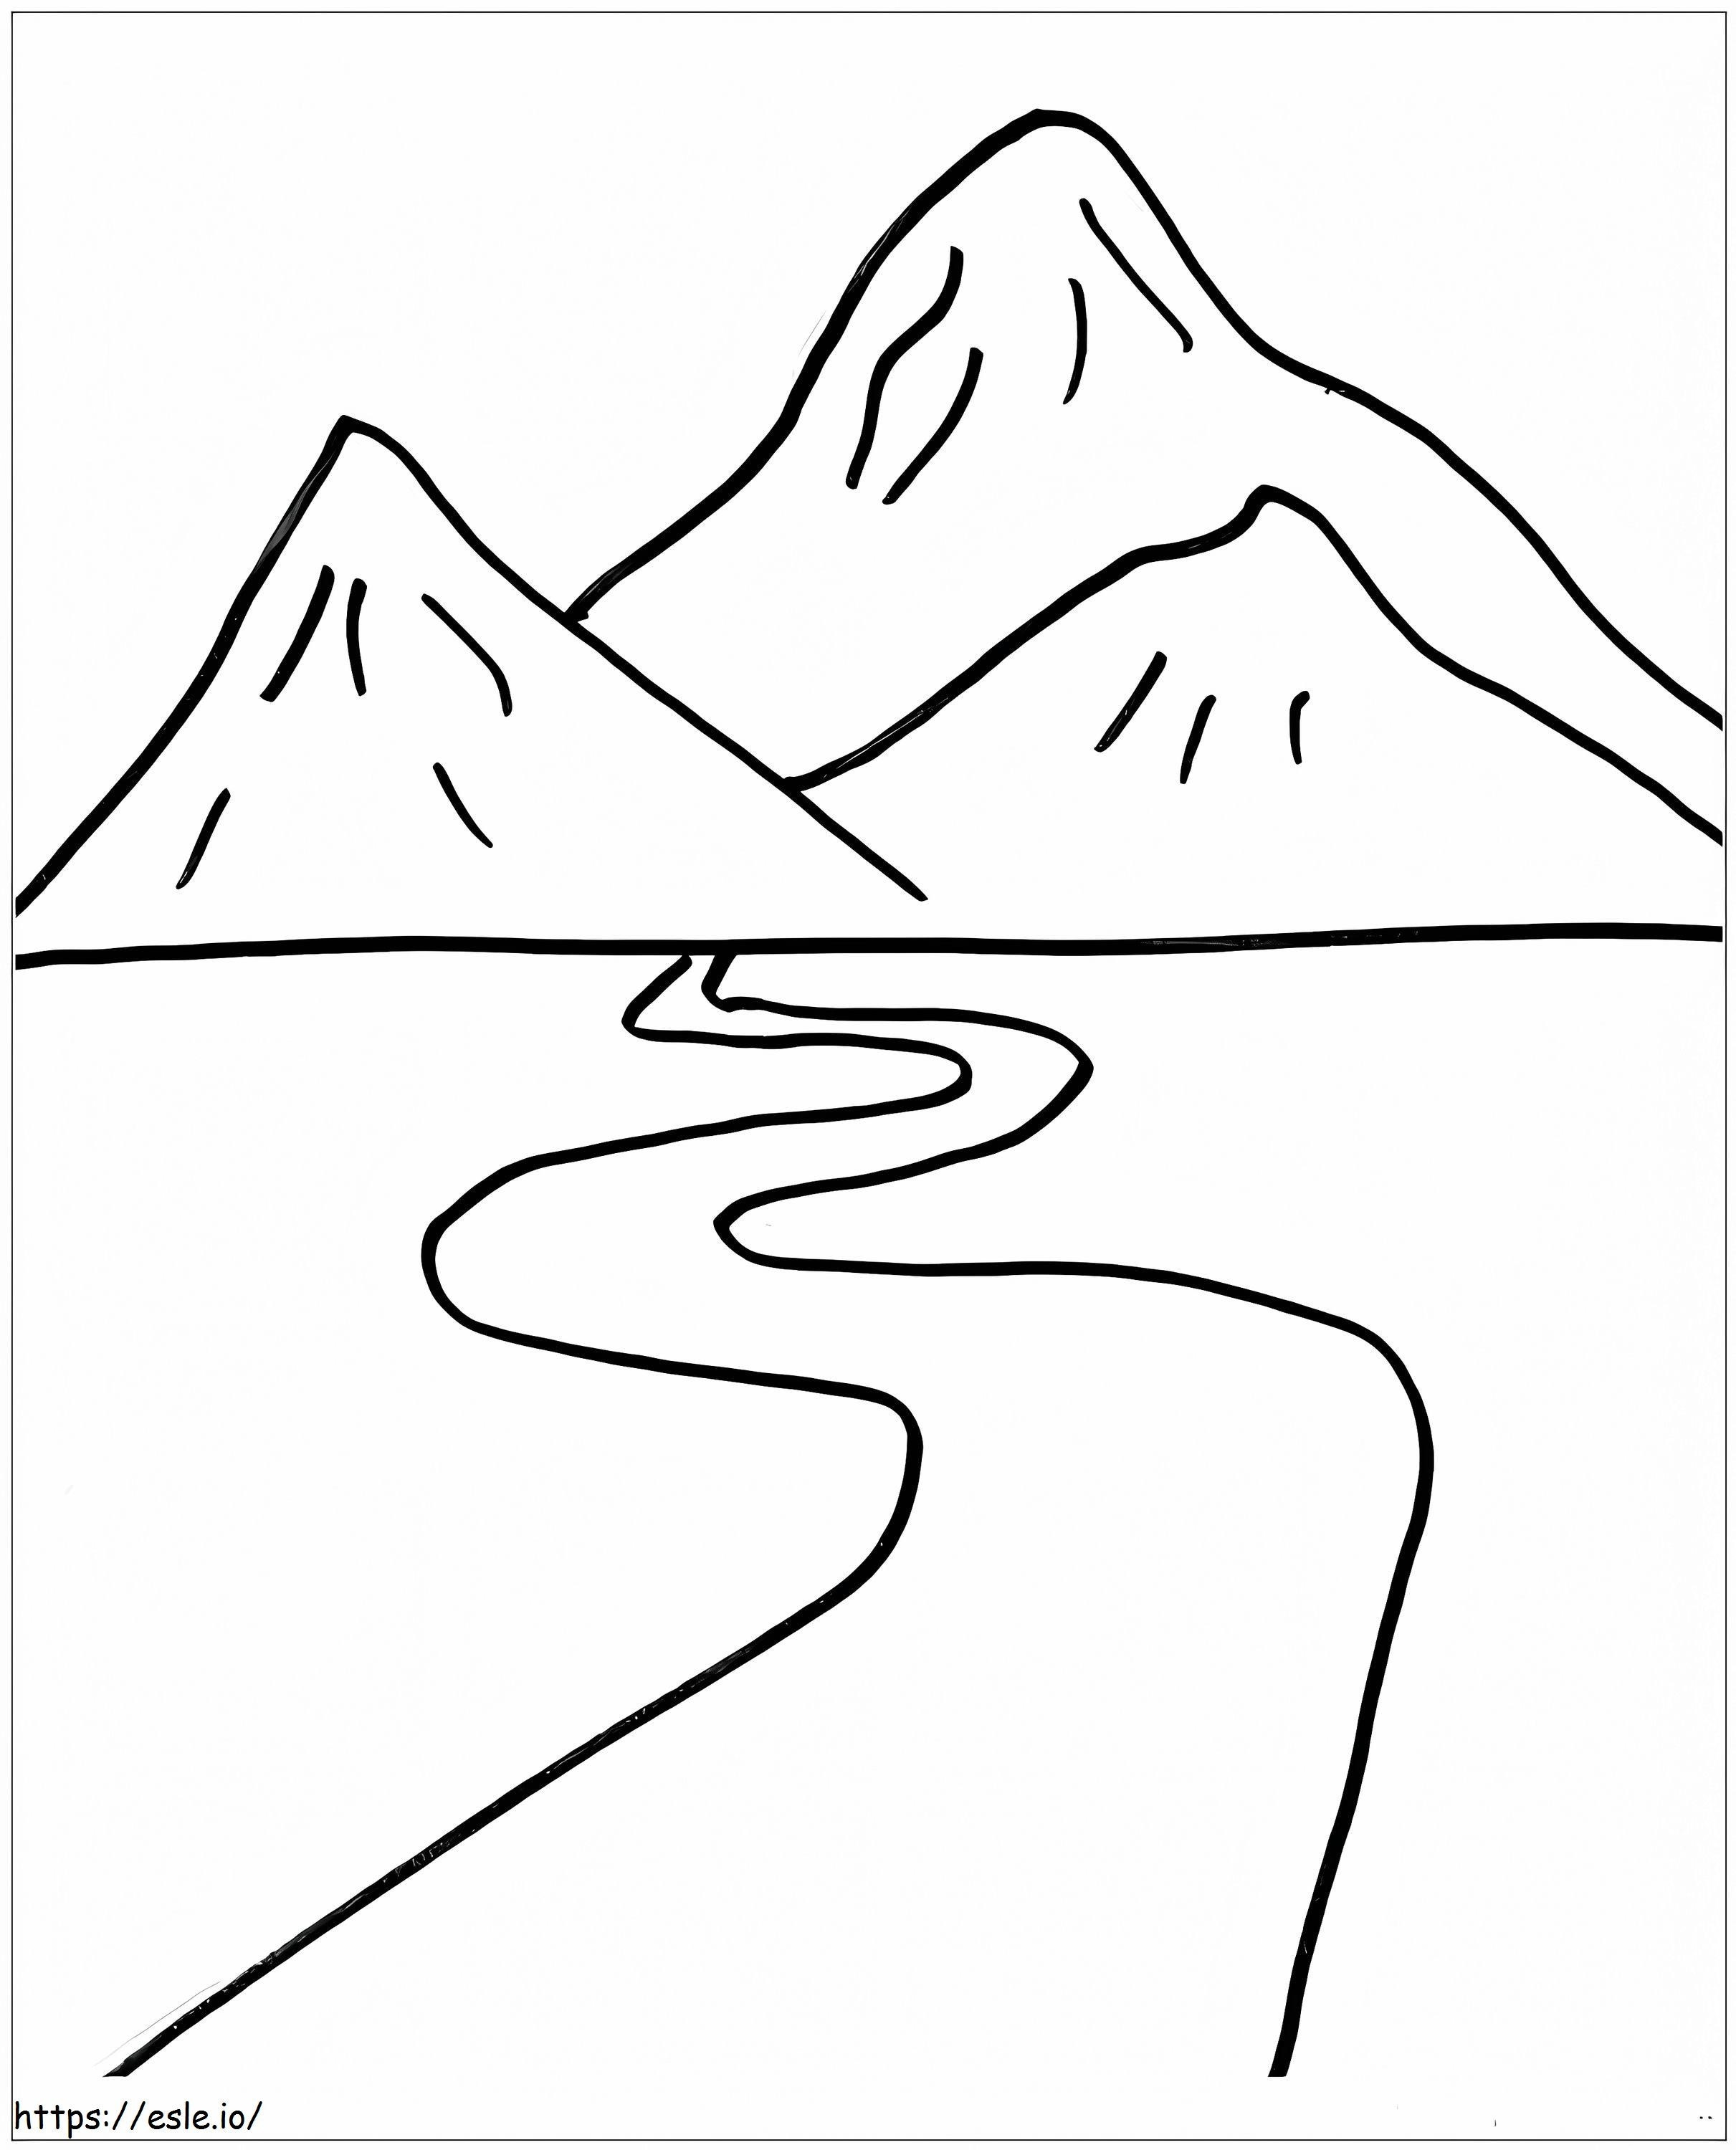 Road To The Mountain coloring page